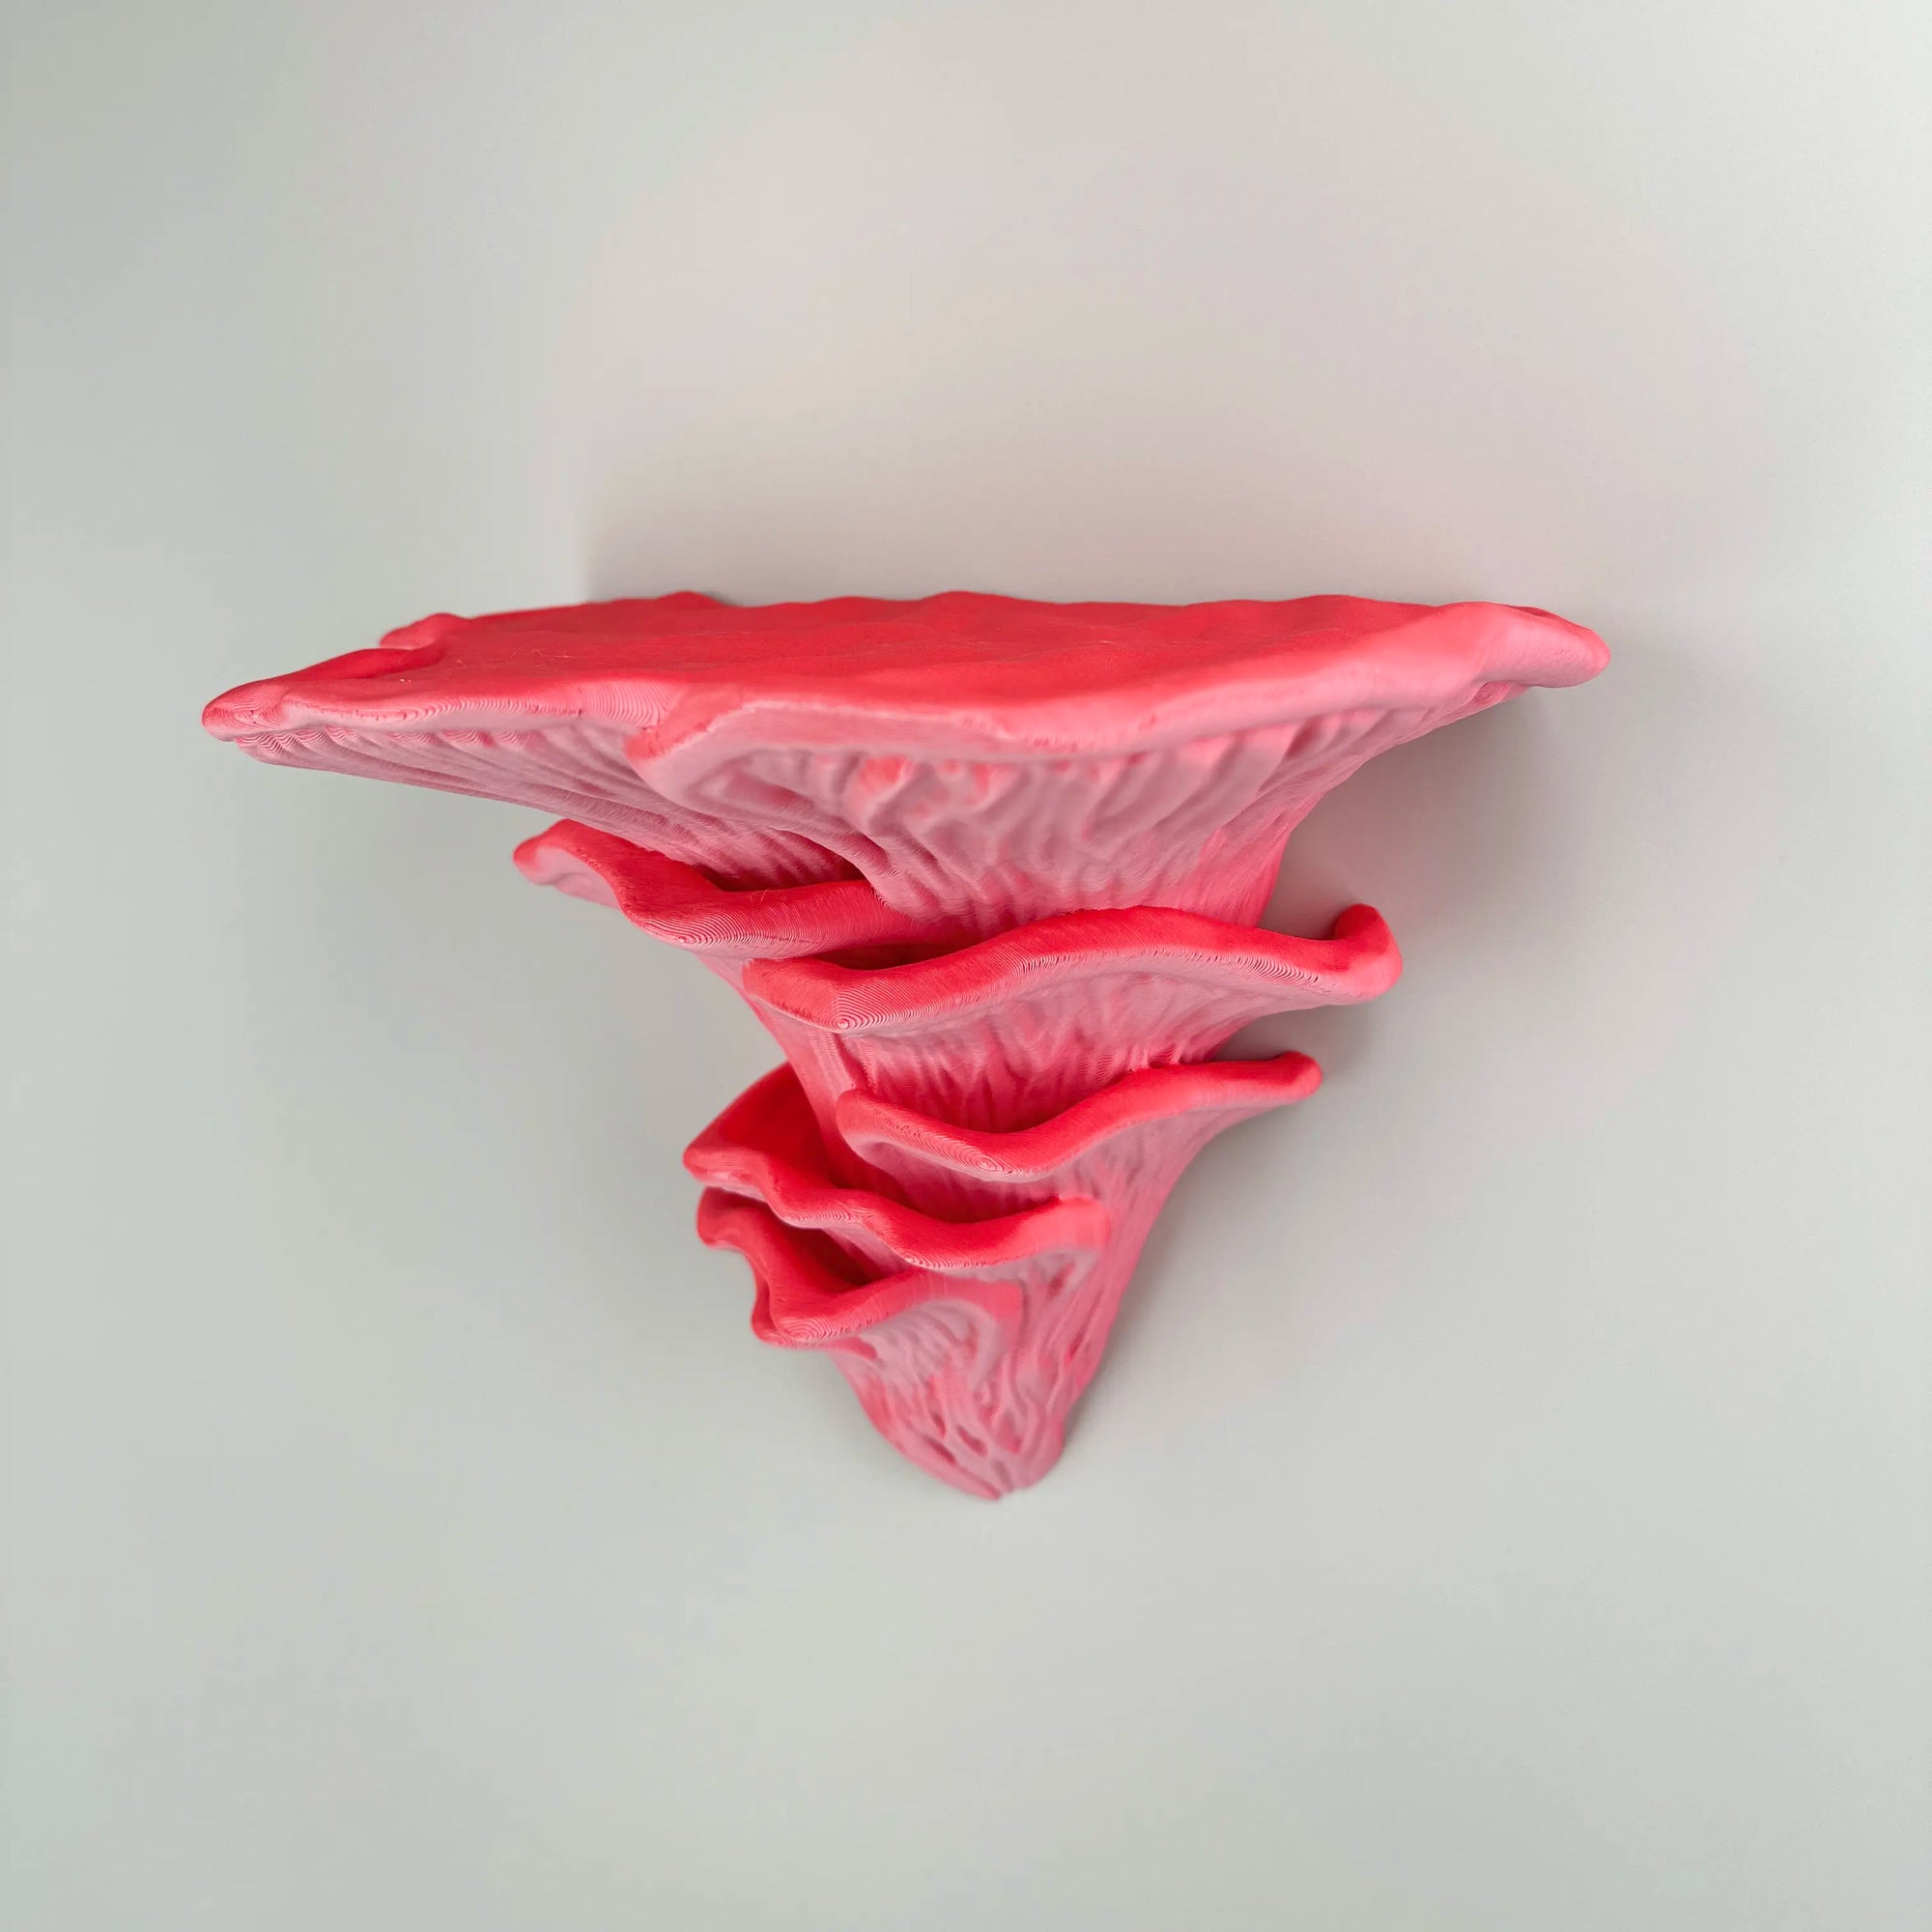  Djamor Fungus Wall Shelf mounted in a living room with decorative items. Flamingo color.